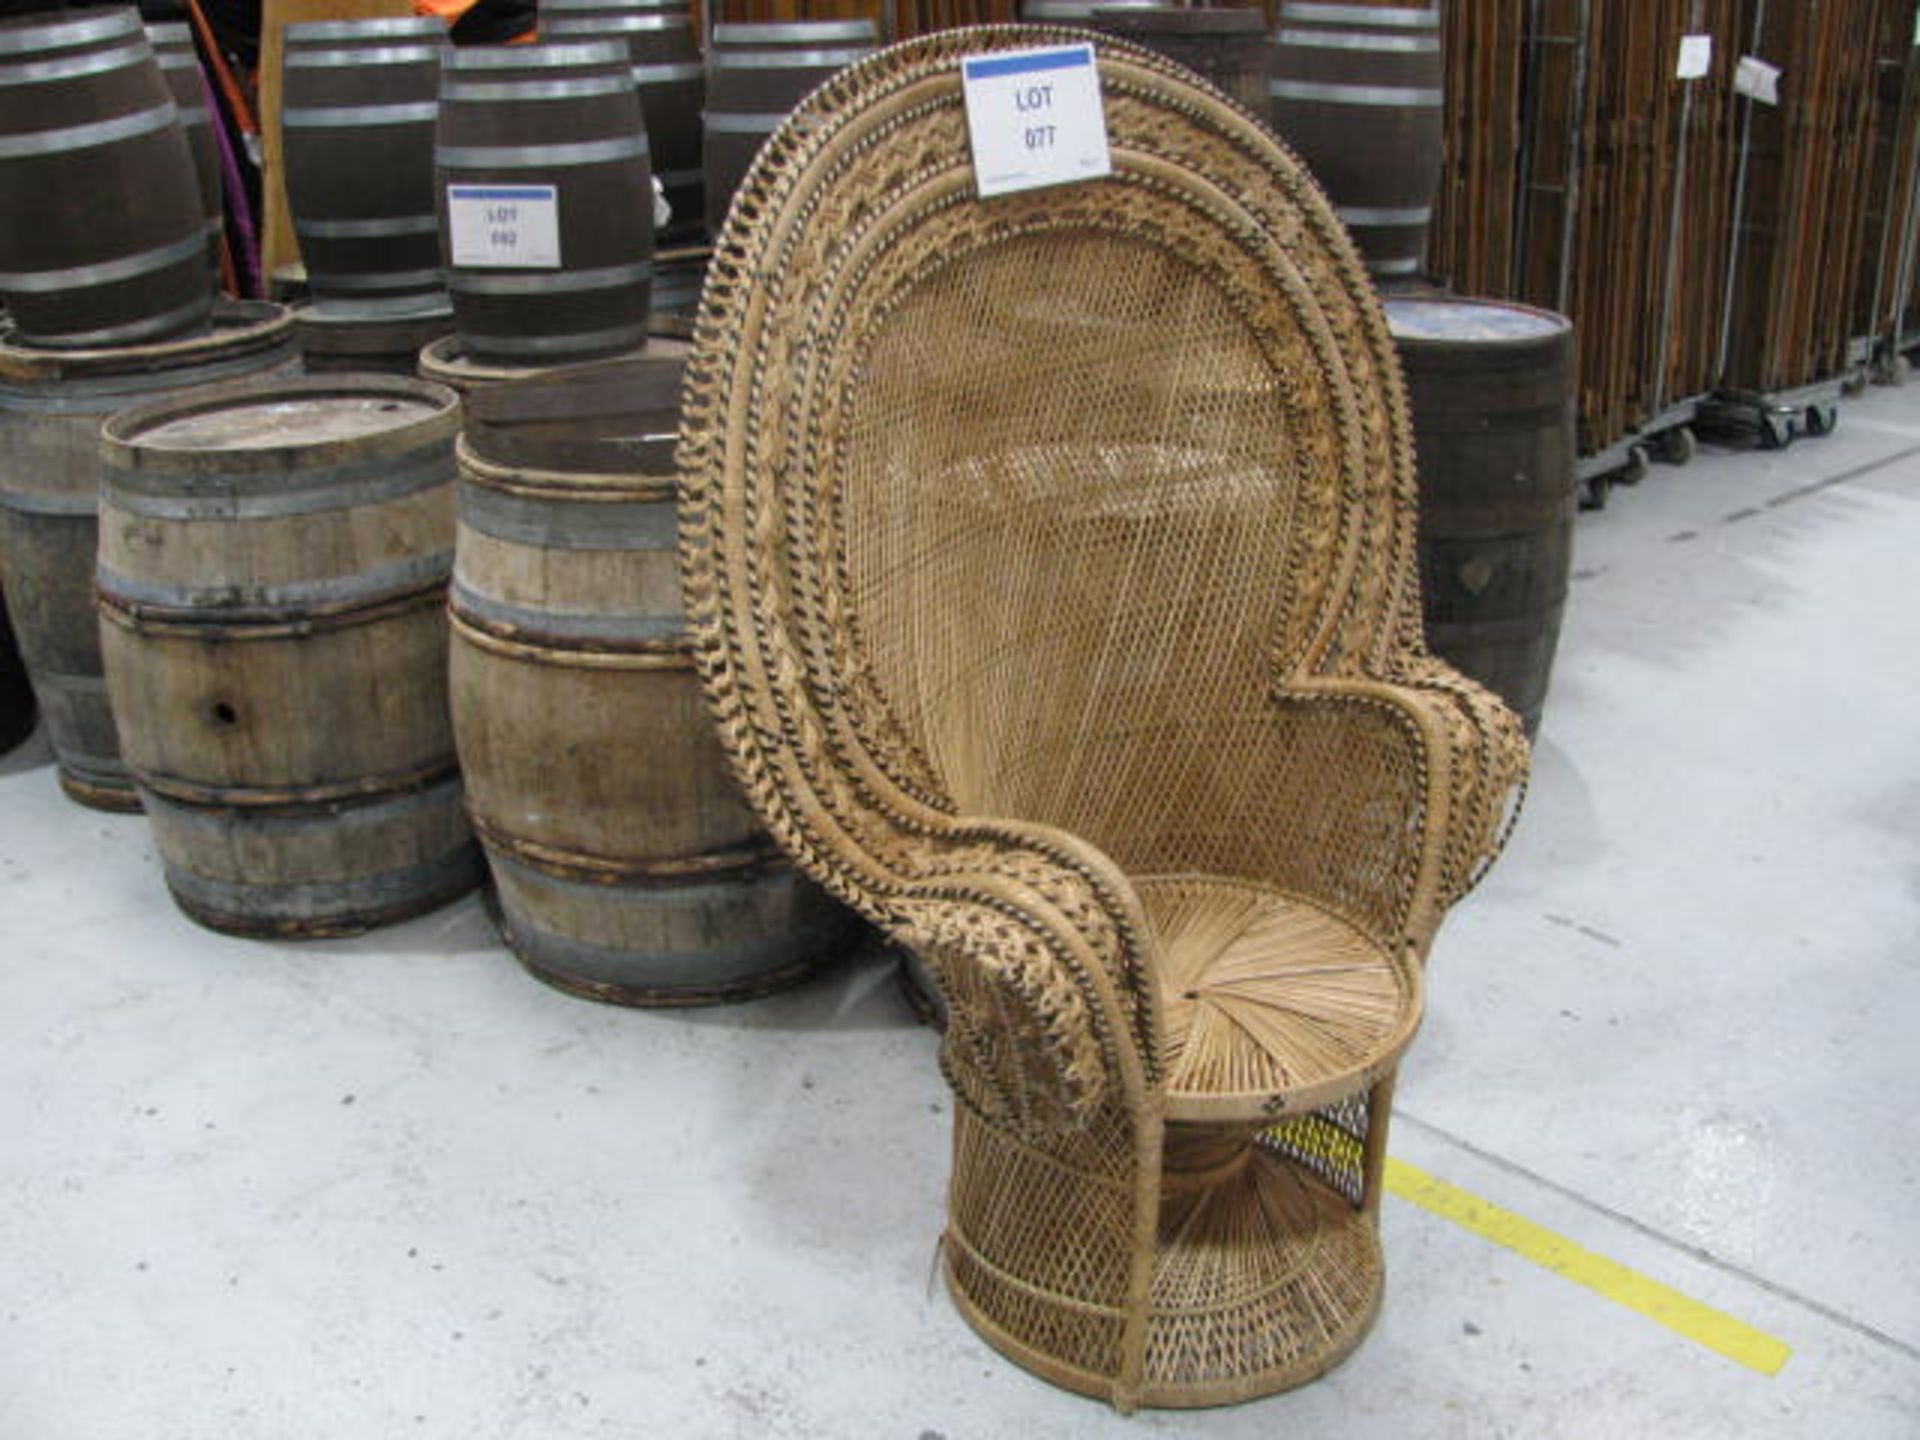 Peacock style wicker chairs - Image 2 of 2